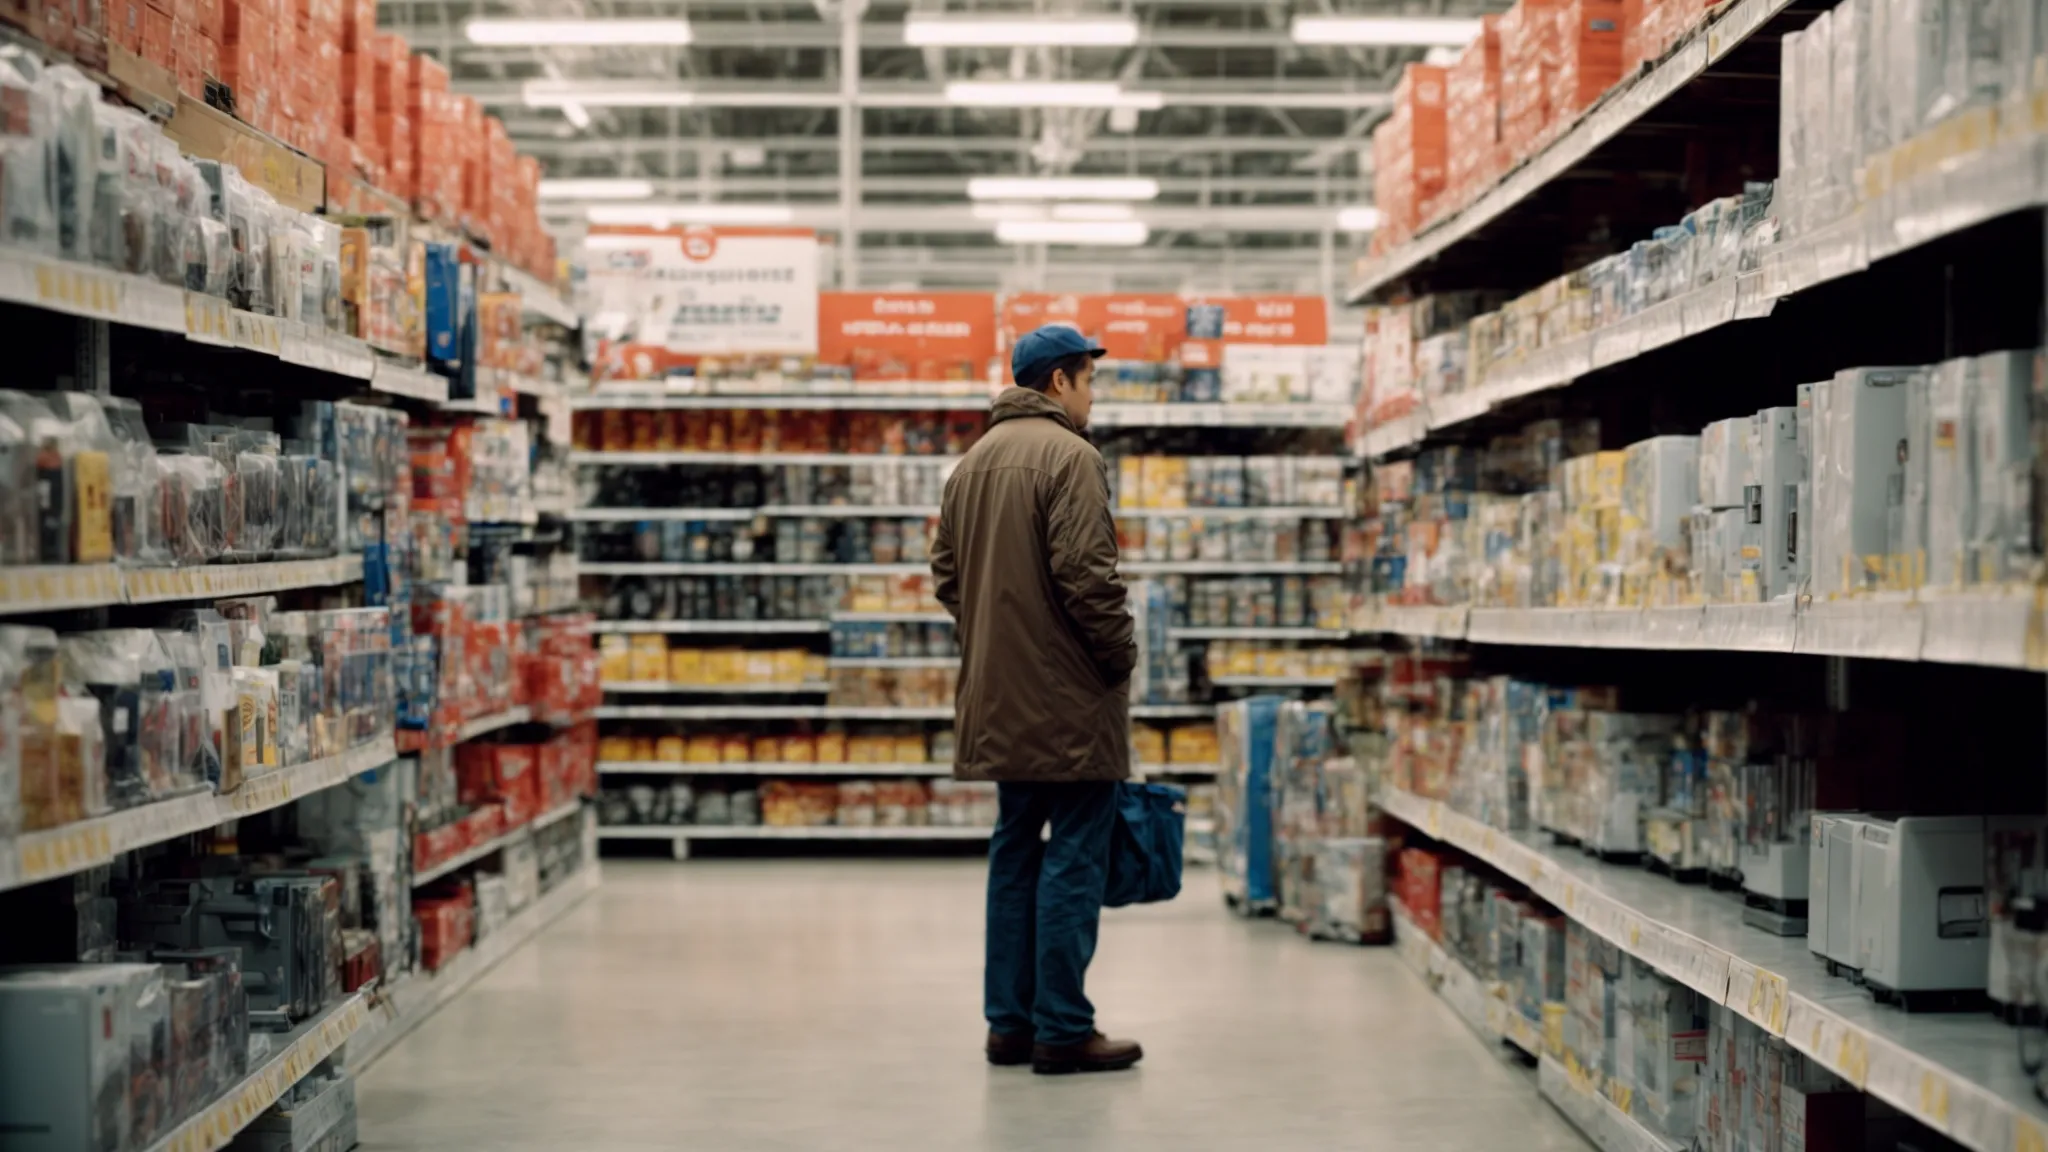 a person contemplating a display of sump pumps and backup power supplies in a hardware store aisle.